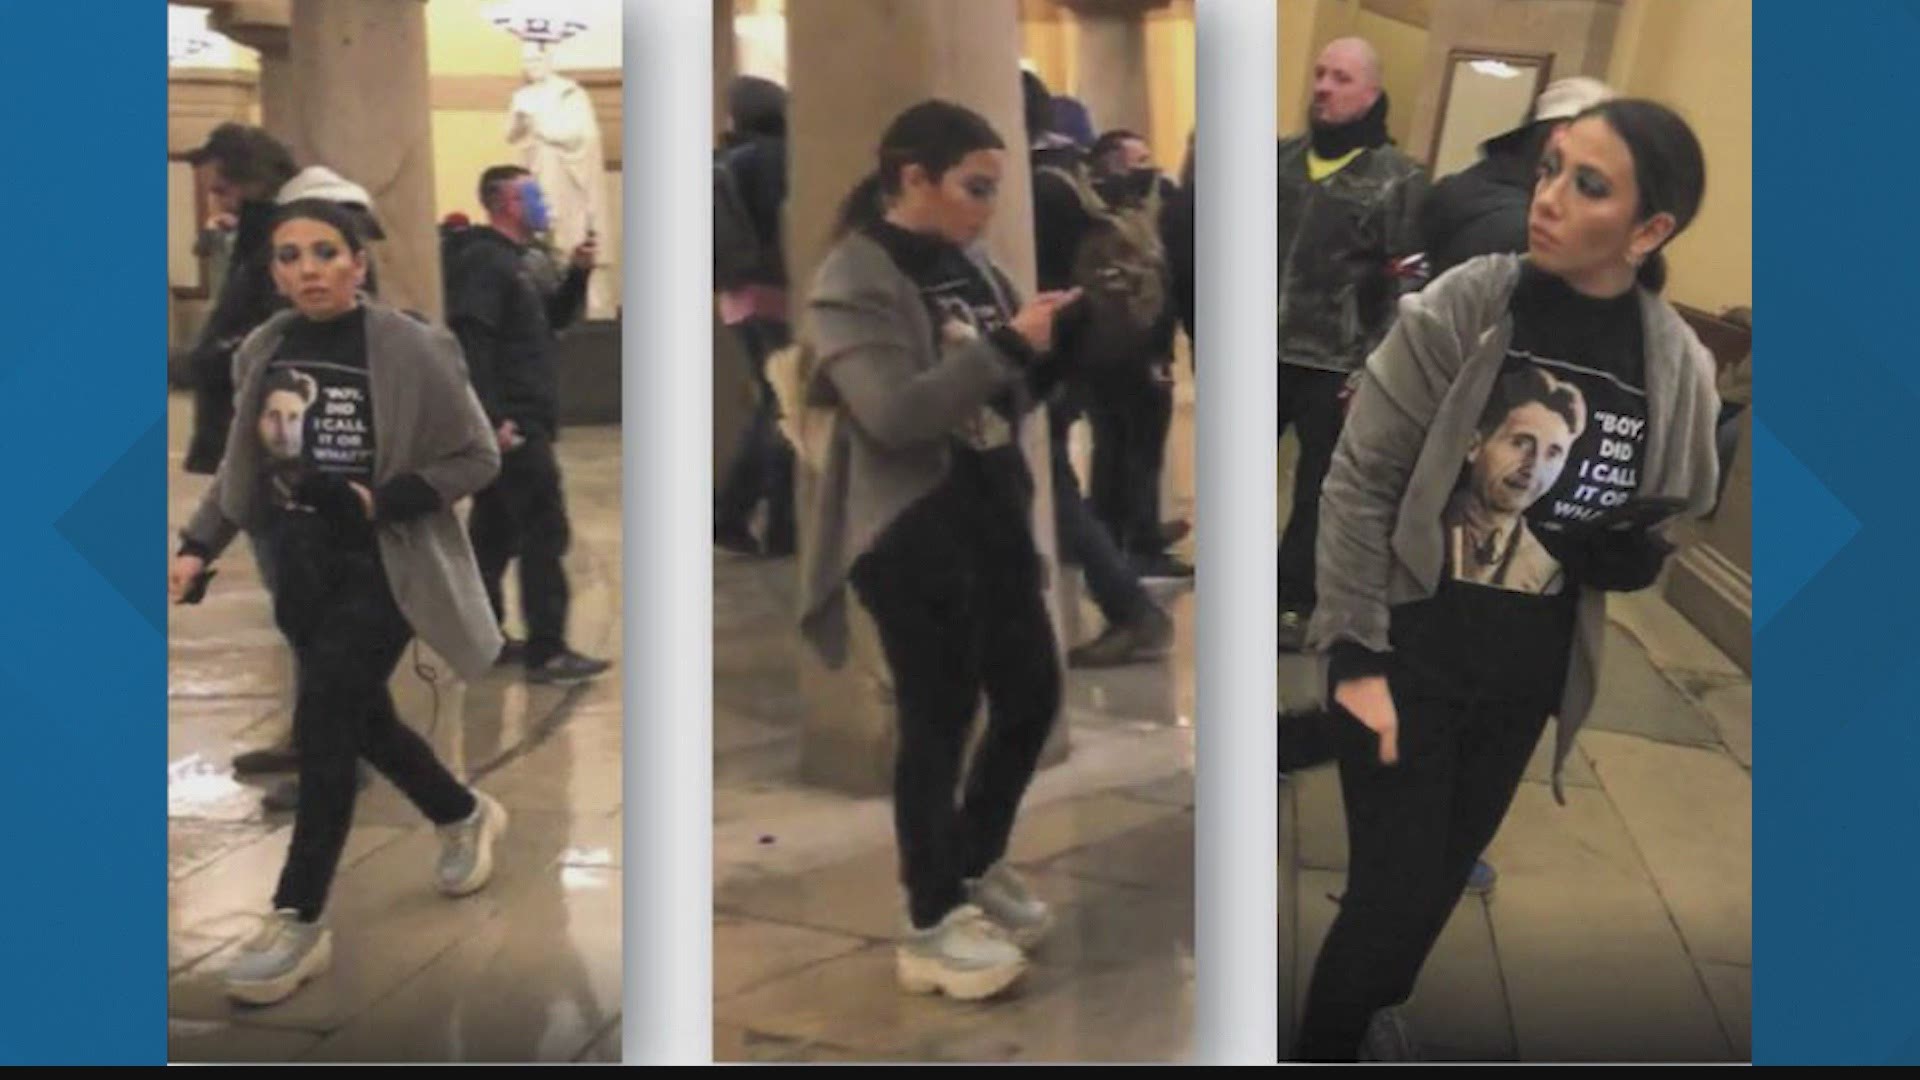 After her alleged participation in the U.S. Capitol riot on Jan. 6, the woman was arrested and charged in Huntsville, Alabama.